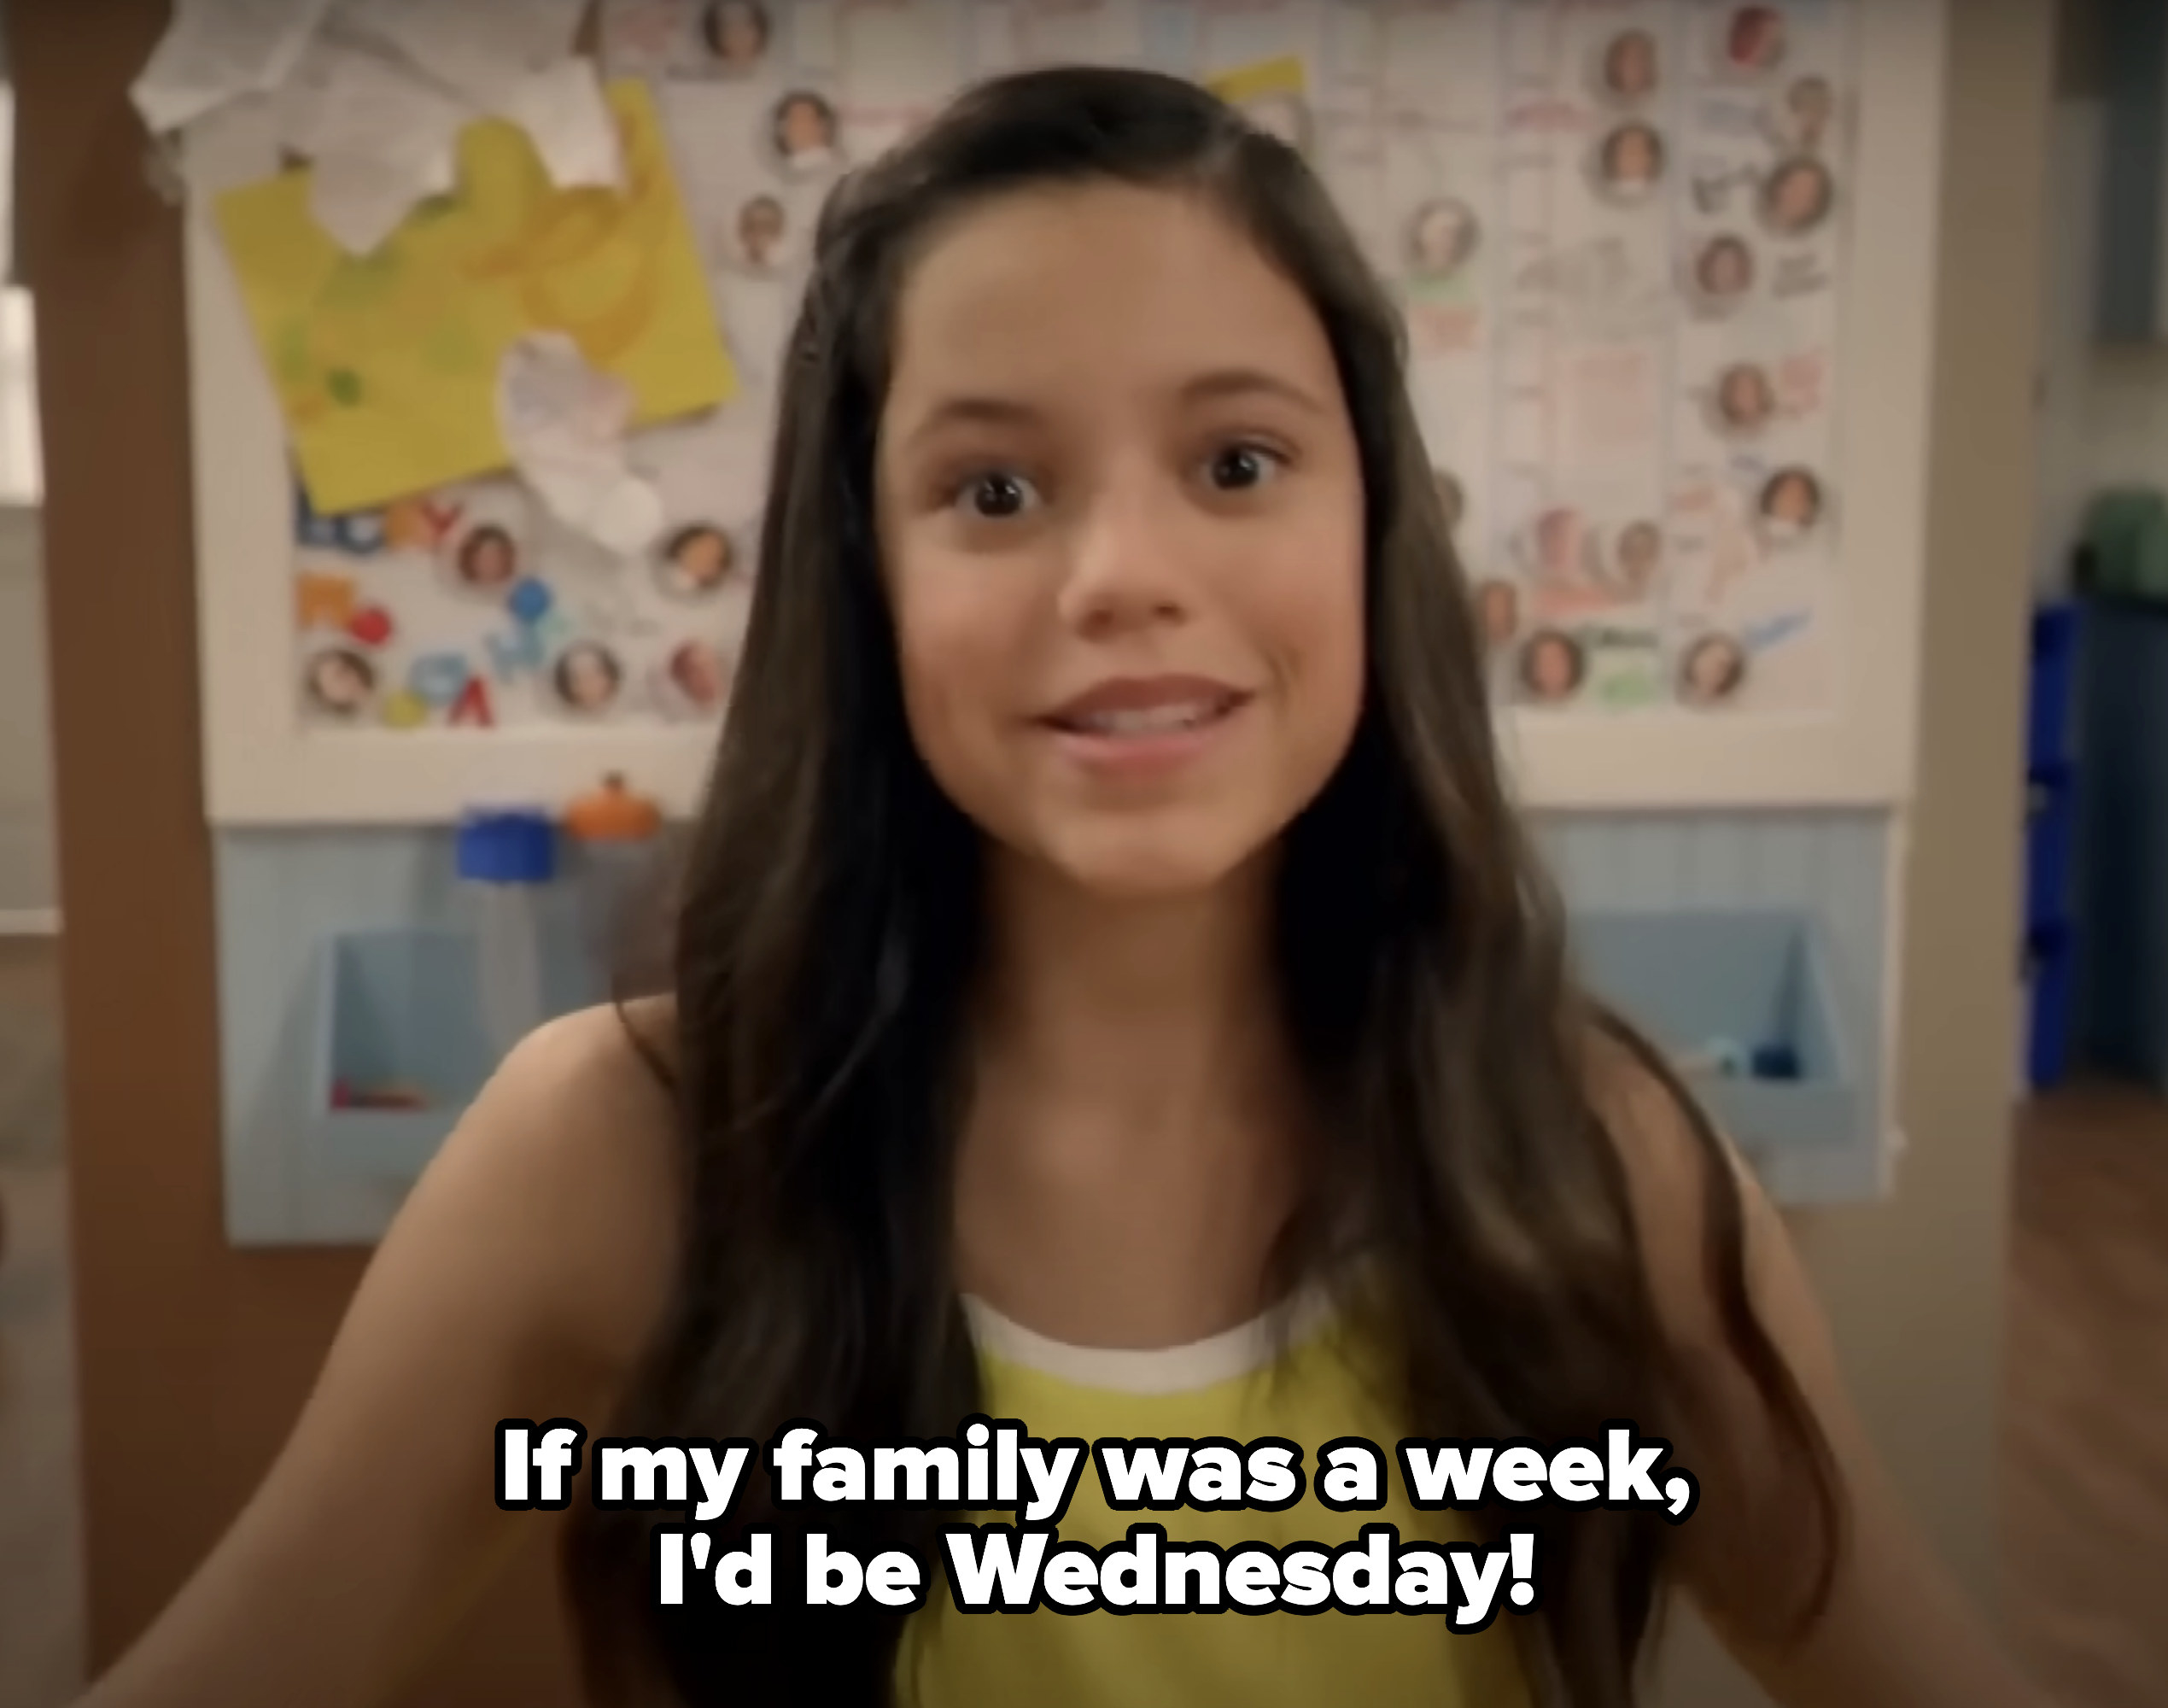 &quot;If my family was a week, I&#x27;d be Wednesday!&quot;